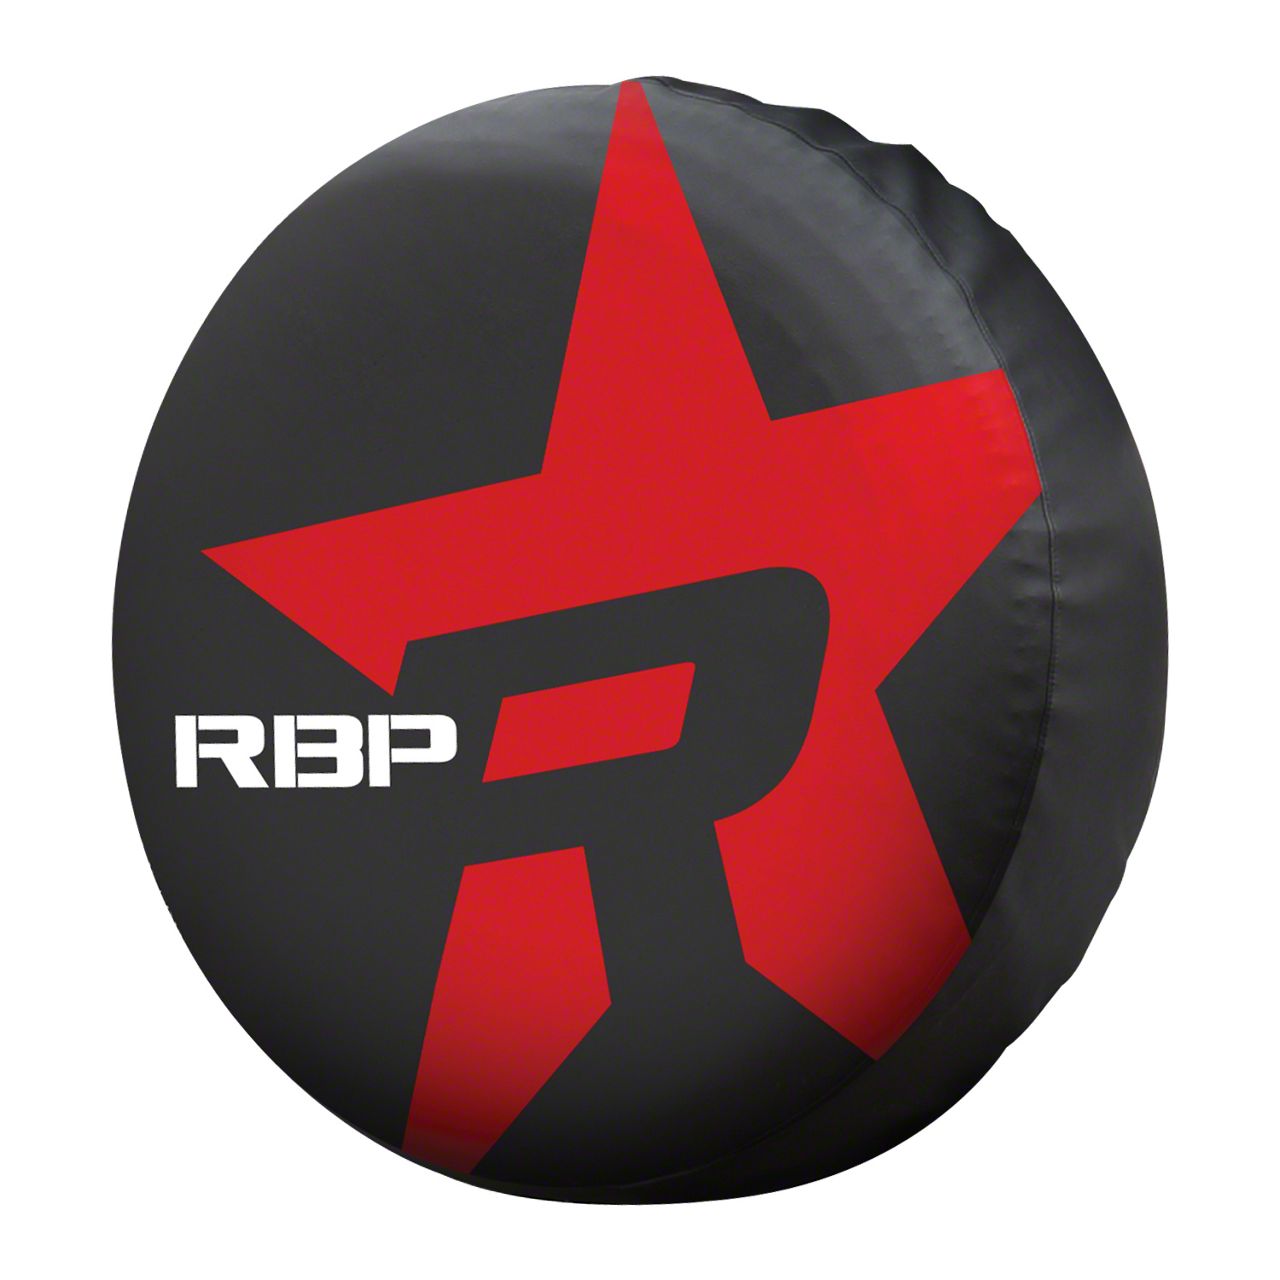 RBP Jeep Wrangler Spare Tire Cover; Red Star; 29.50 to 32.50-Inch Tire Cove  RBP-TC3 (66-18 Jeep CJ5, CJ7, Wrangler YJ, TJ  JK) Free Shipping